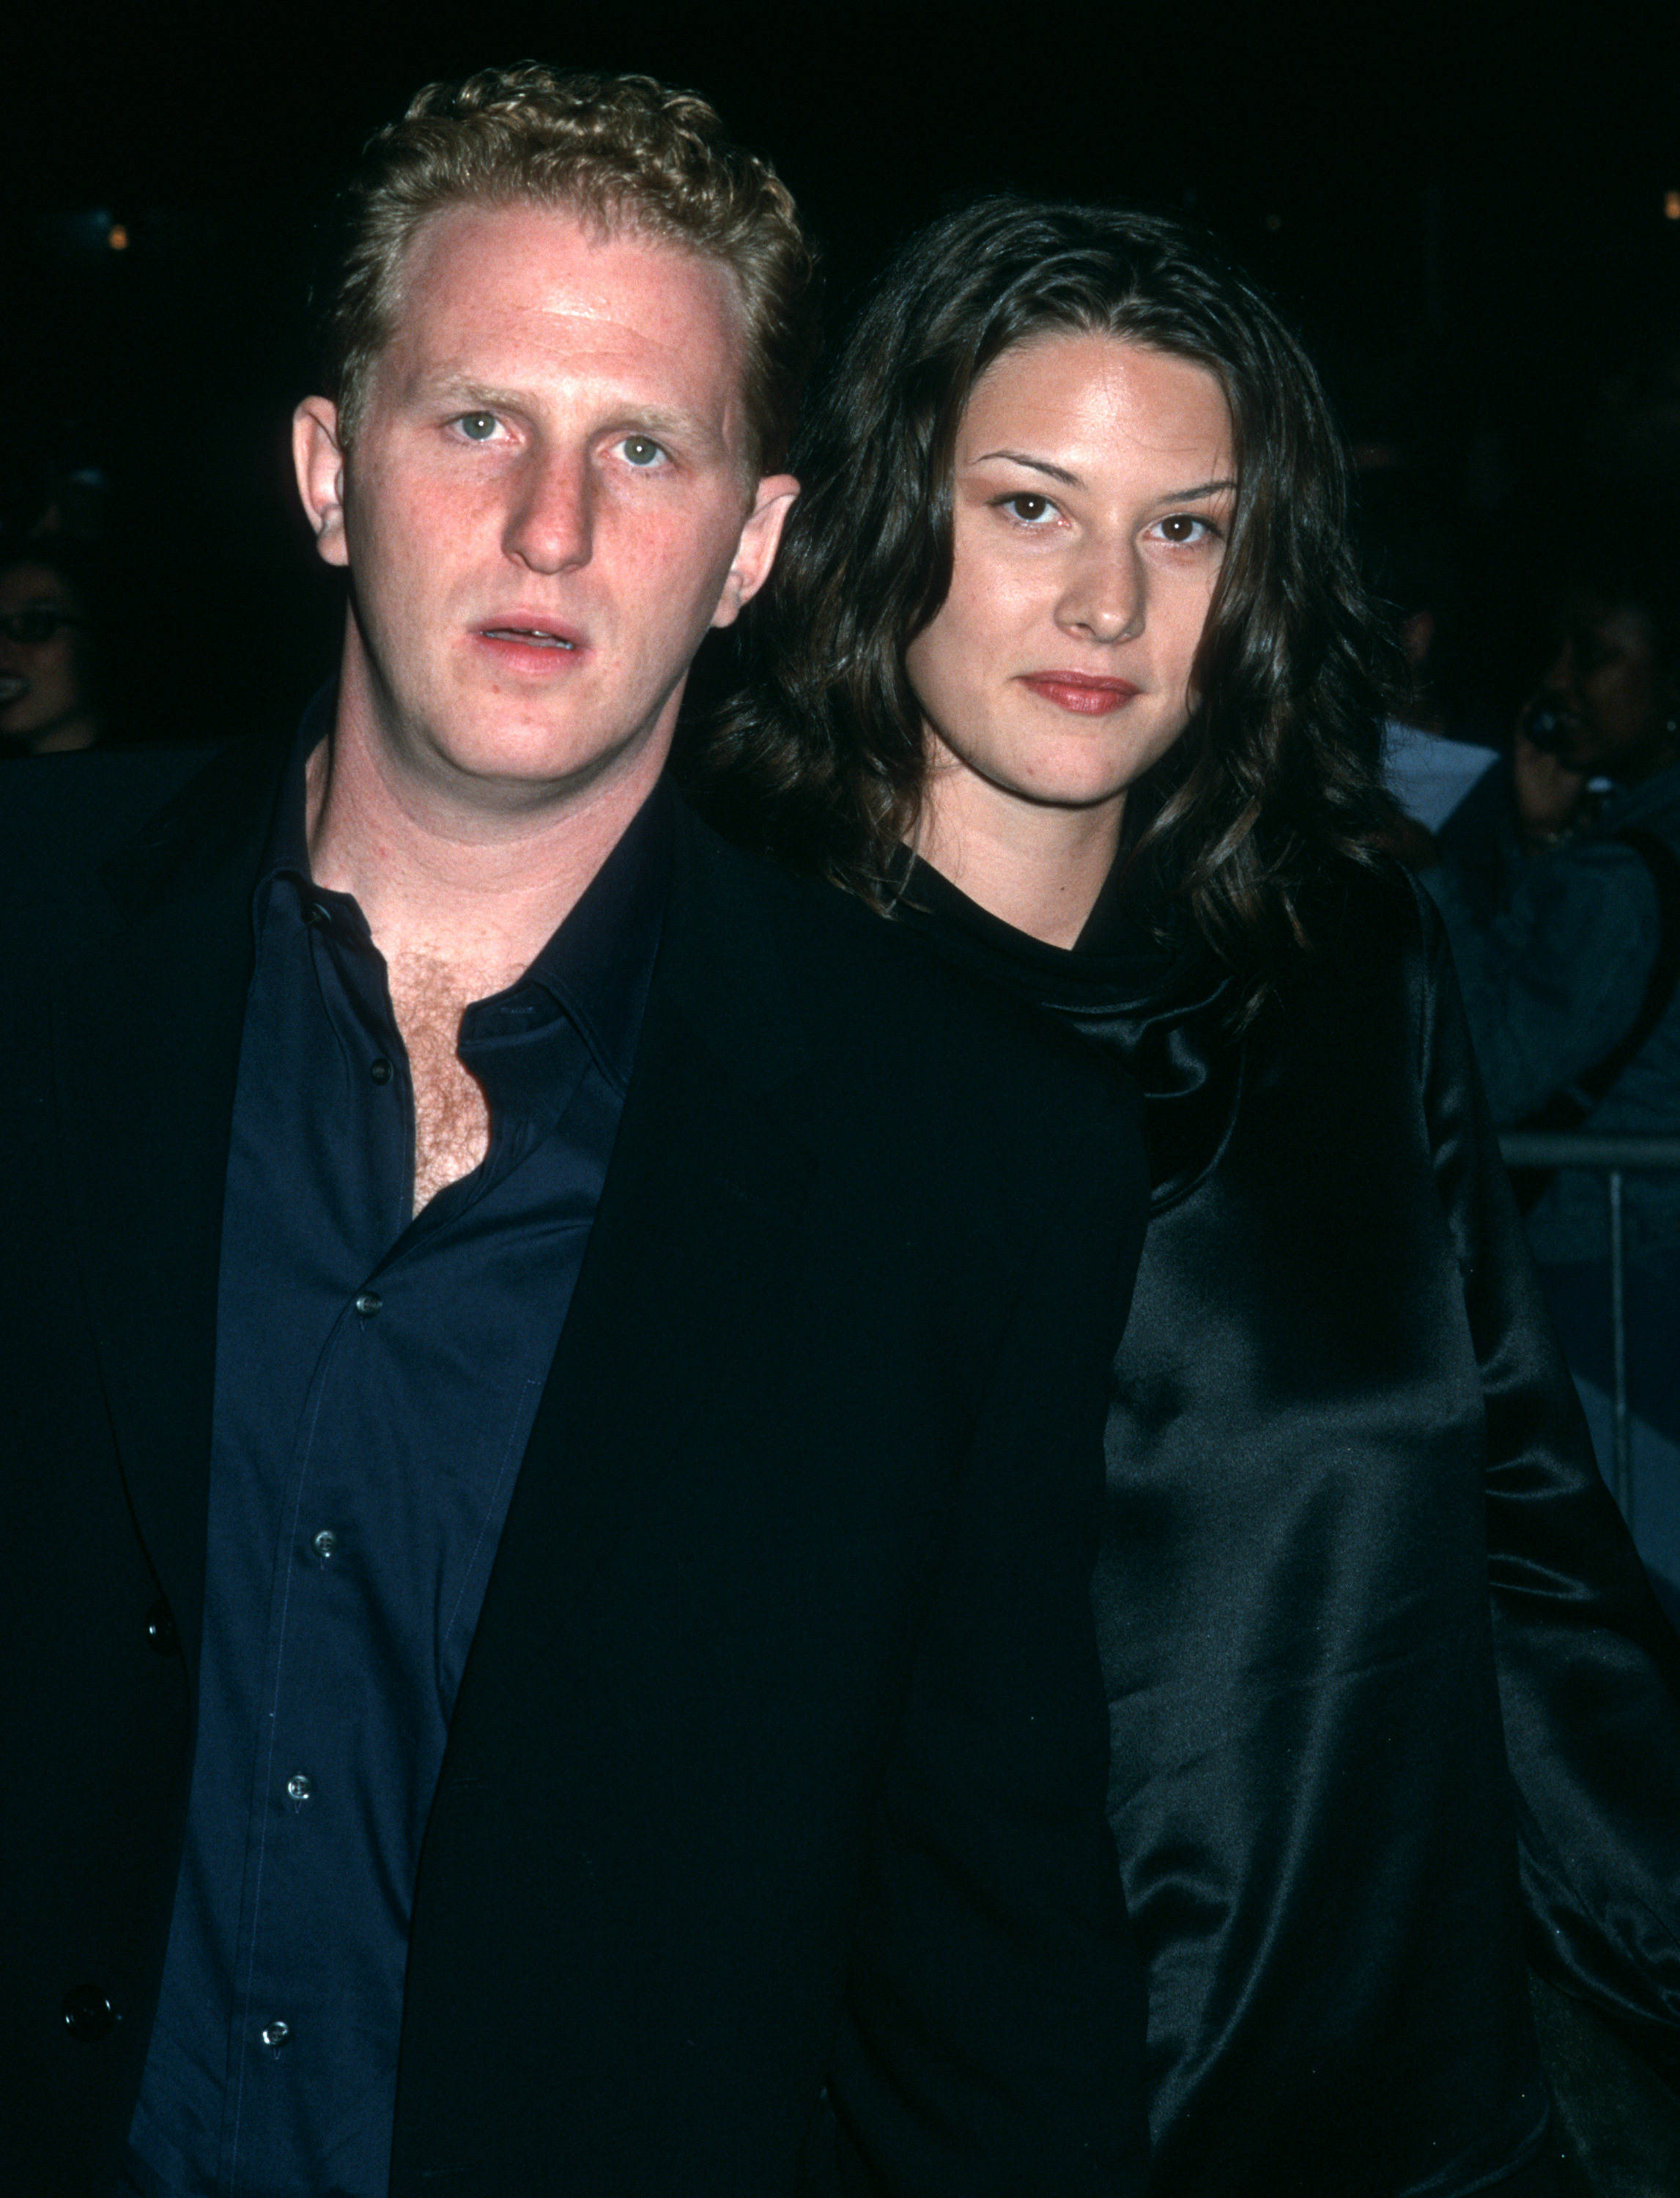 Michael Rapaport and Nichole Beattie attend "Bamboozled" premiere at The Ziegfeld Theatre in 2000 in New York City, New York. | Source: Getty Images